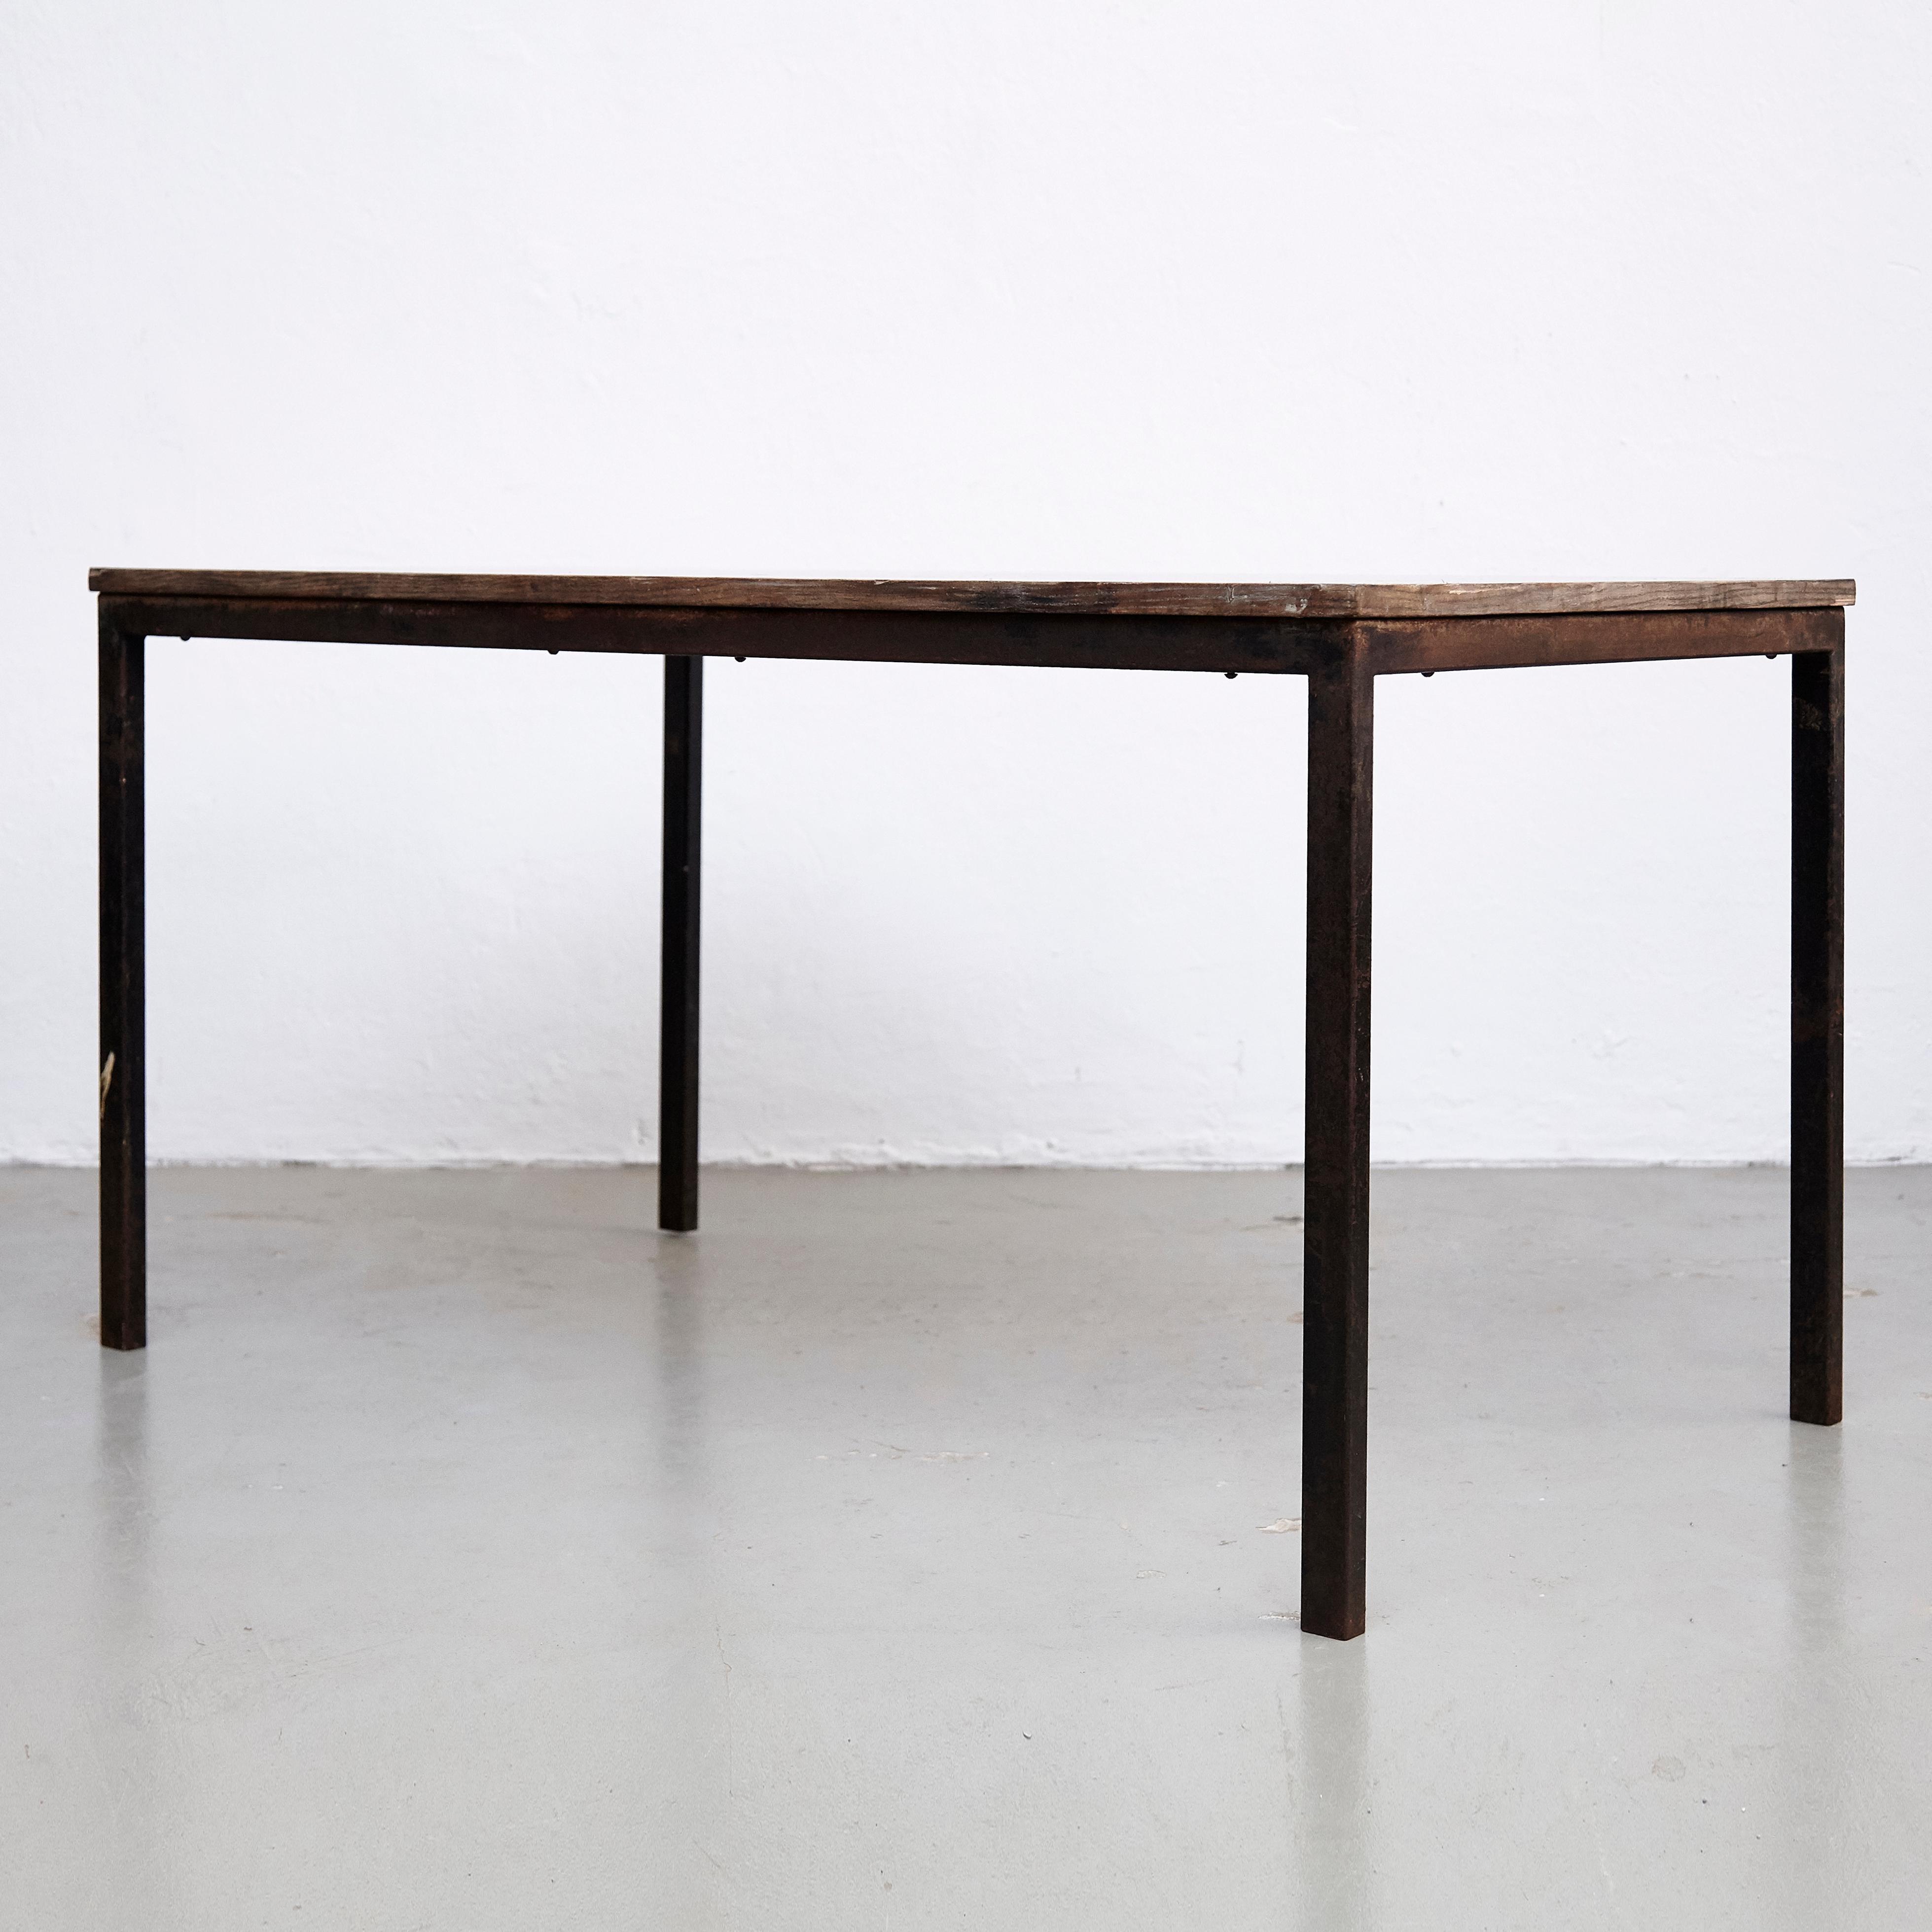 French Charlotte Perriand, Mid-Century Modern, Wood Metal Cansado Table, circa 1950